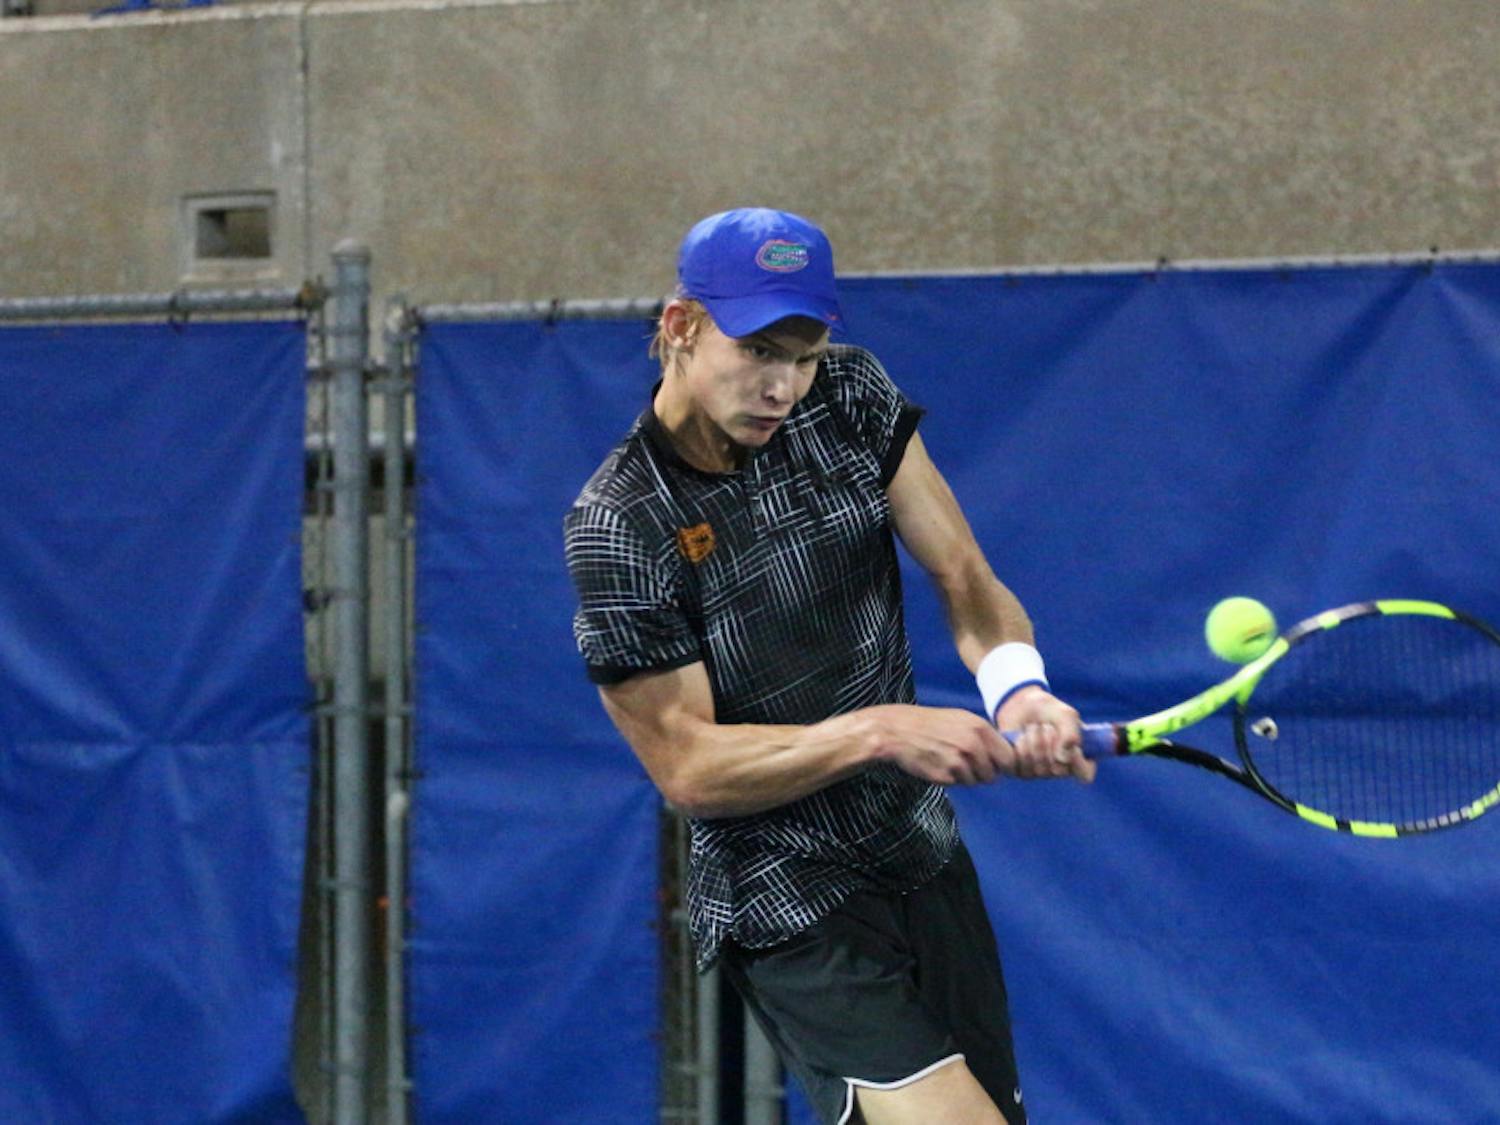 The Gators men's tennis team avenged its SEC Tournament loss and advanced to the NCAA Tournament quarterfinals by defeating Tennessee on Saturday.